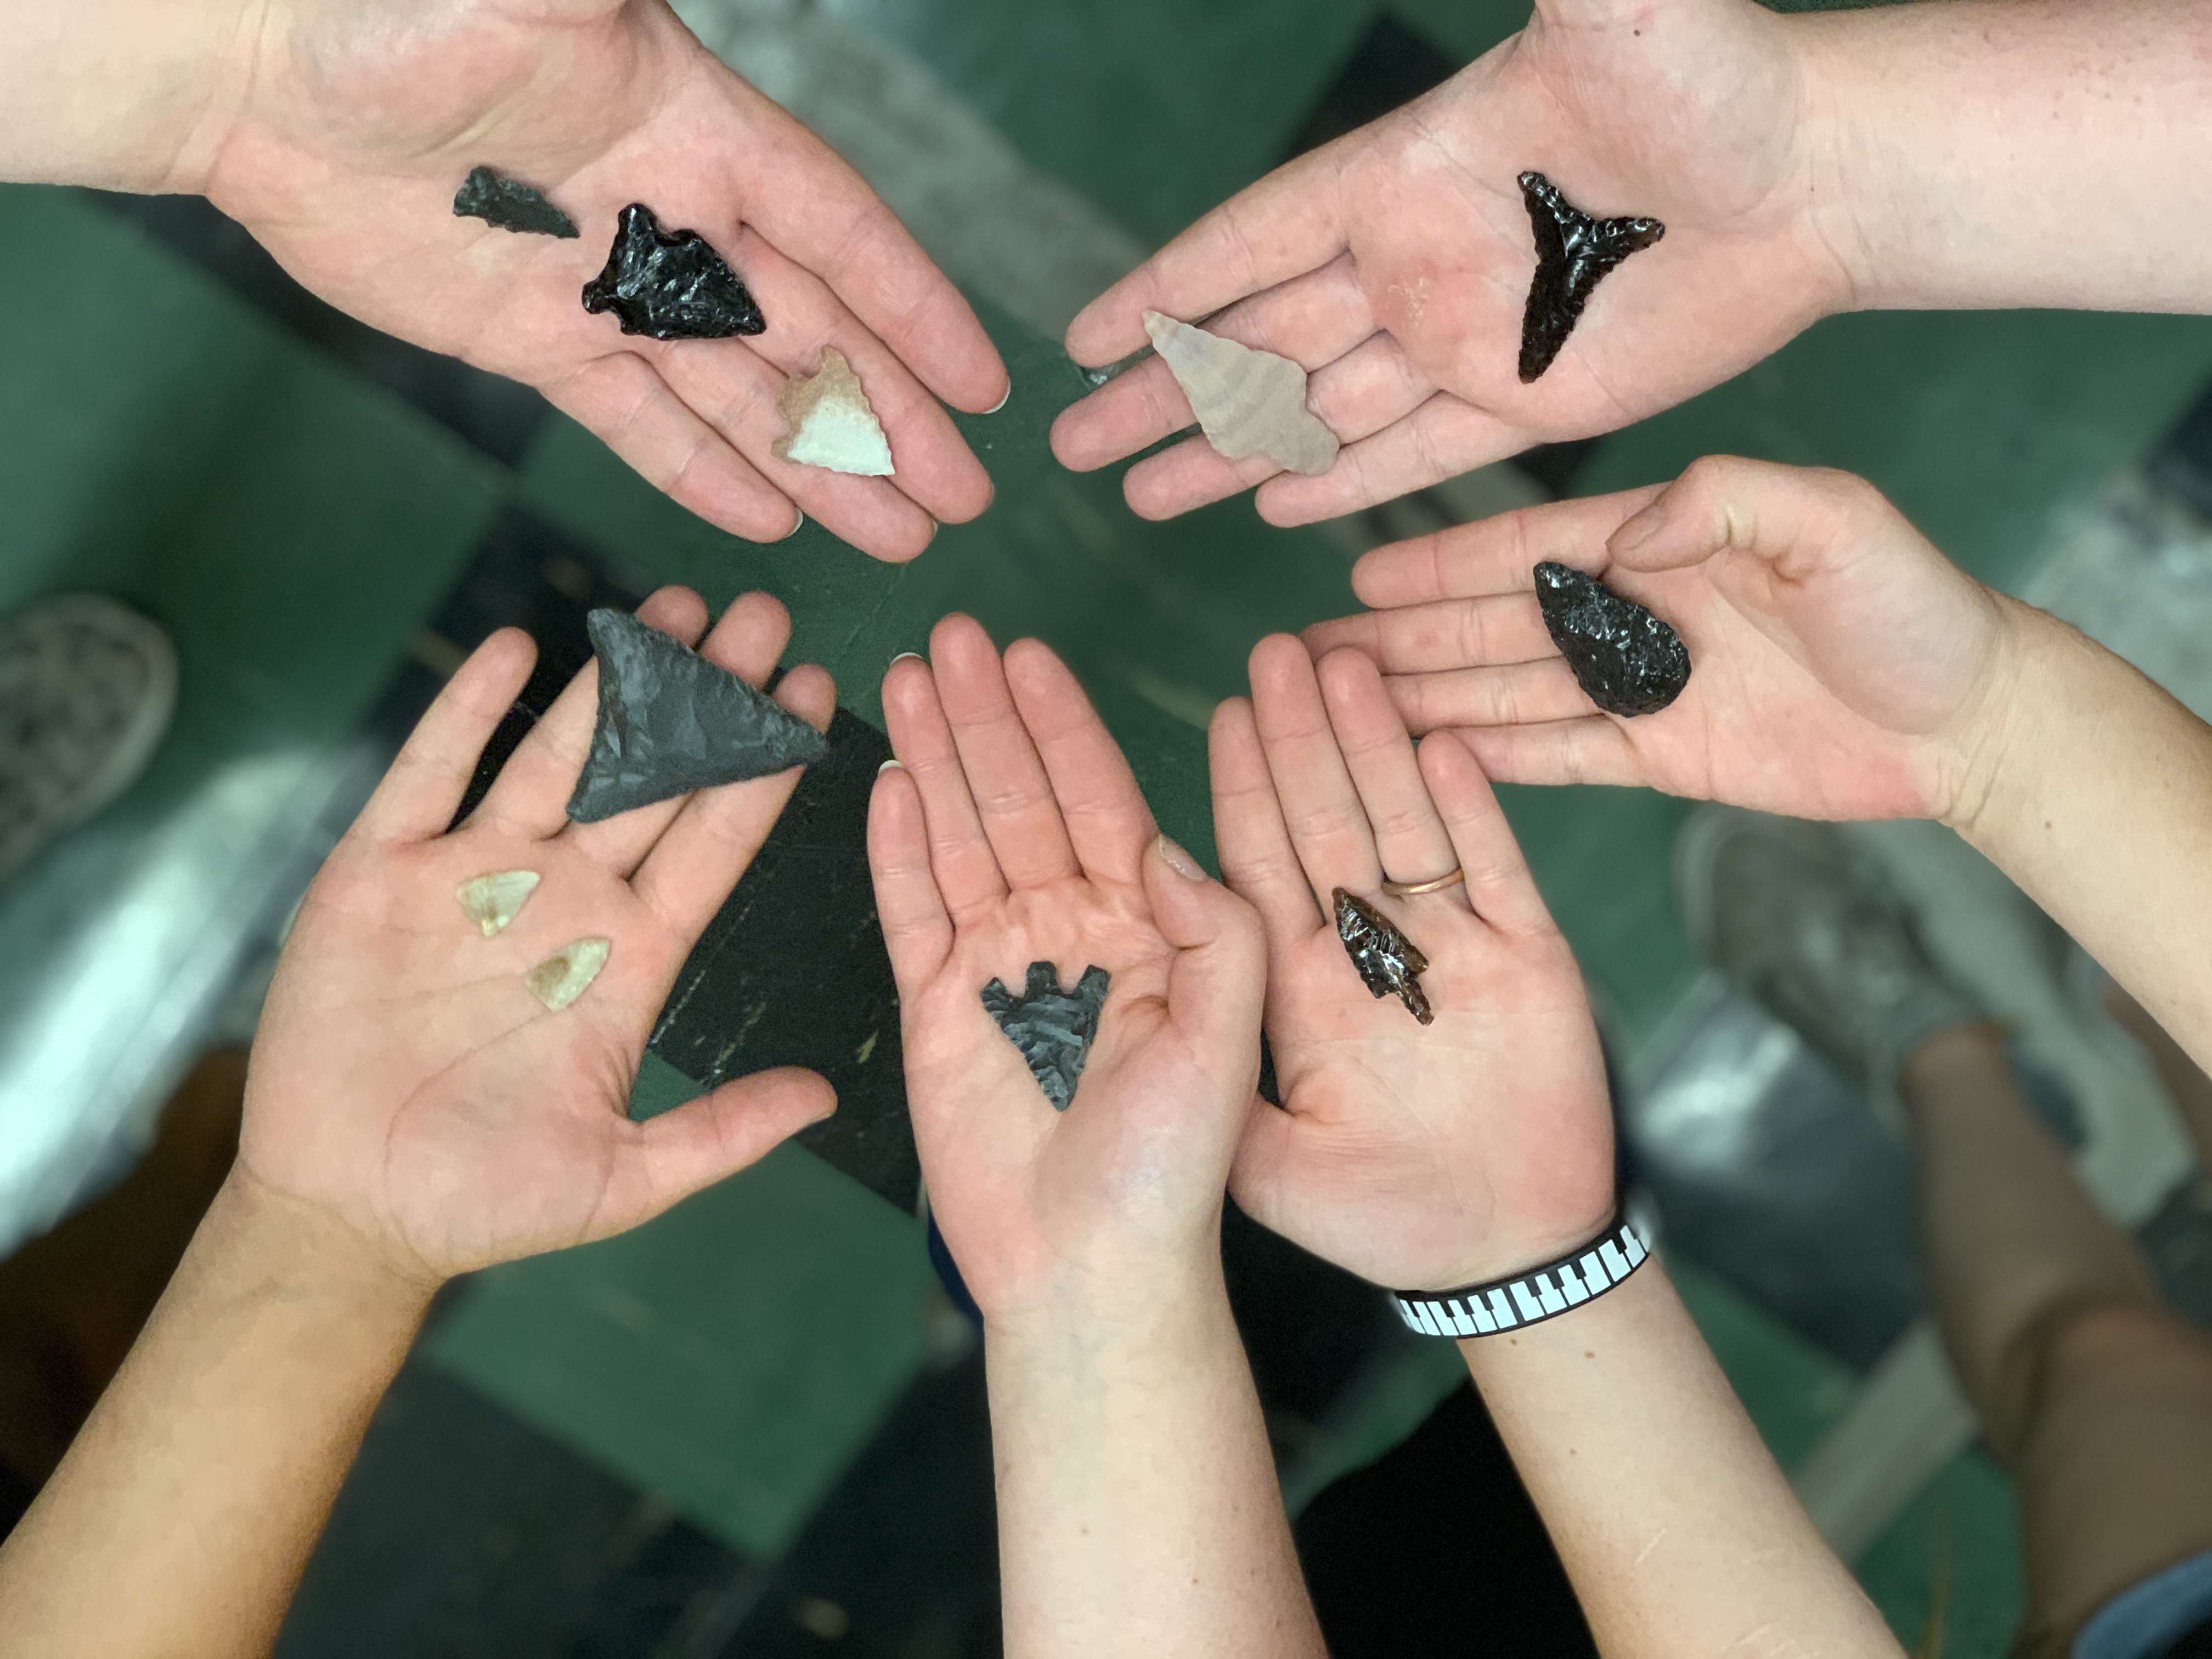 5 hands facing palm-up are holding arrowheads